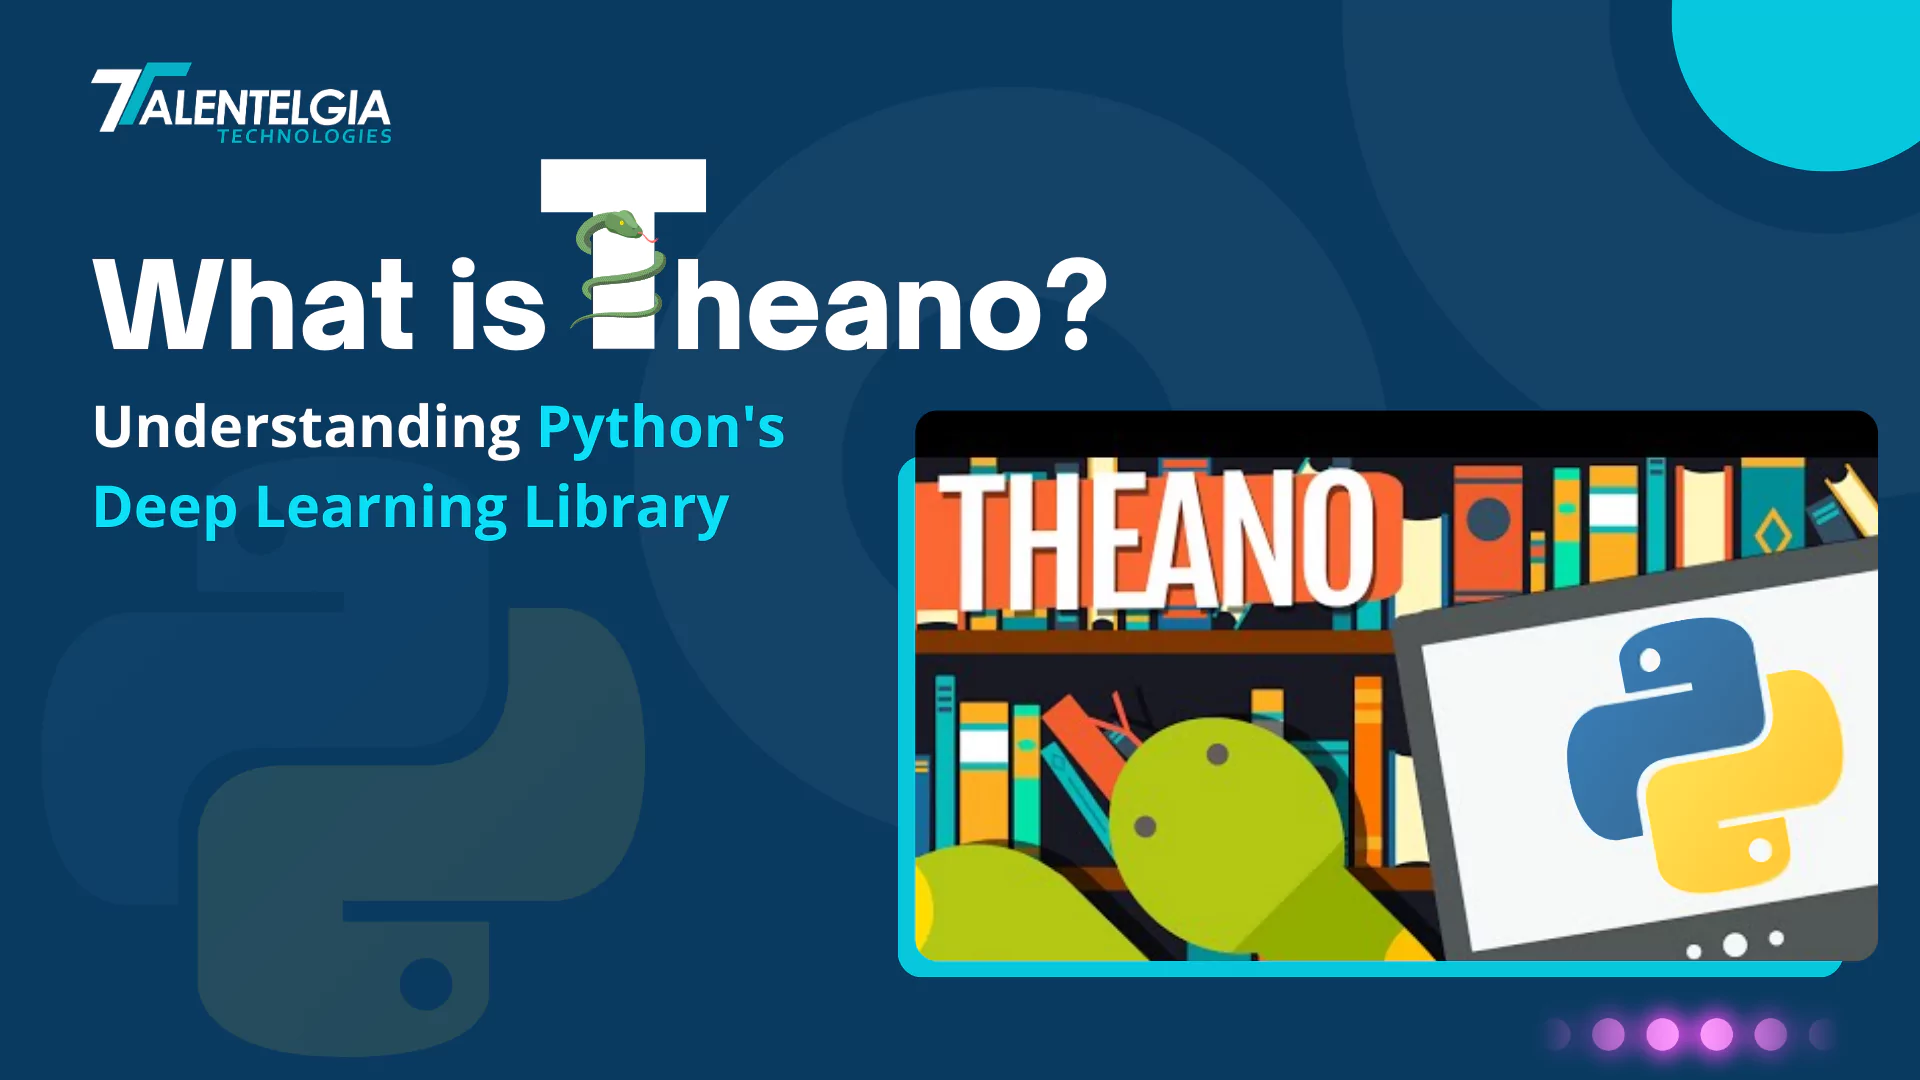 What is Theano?